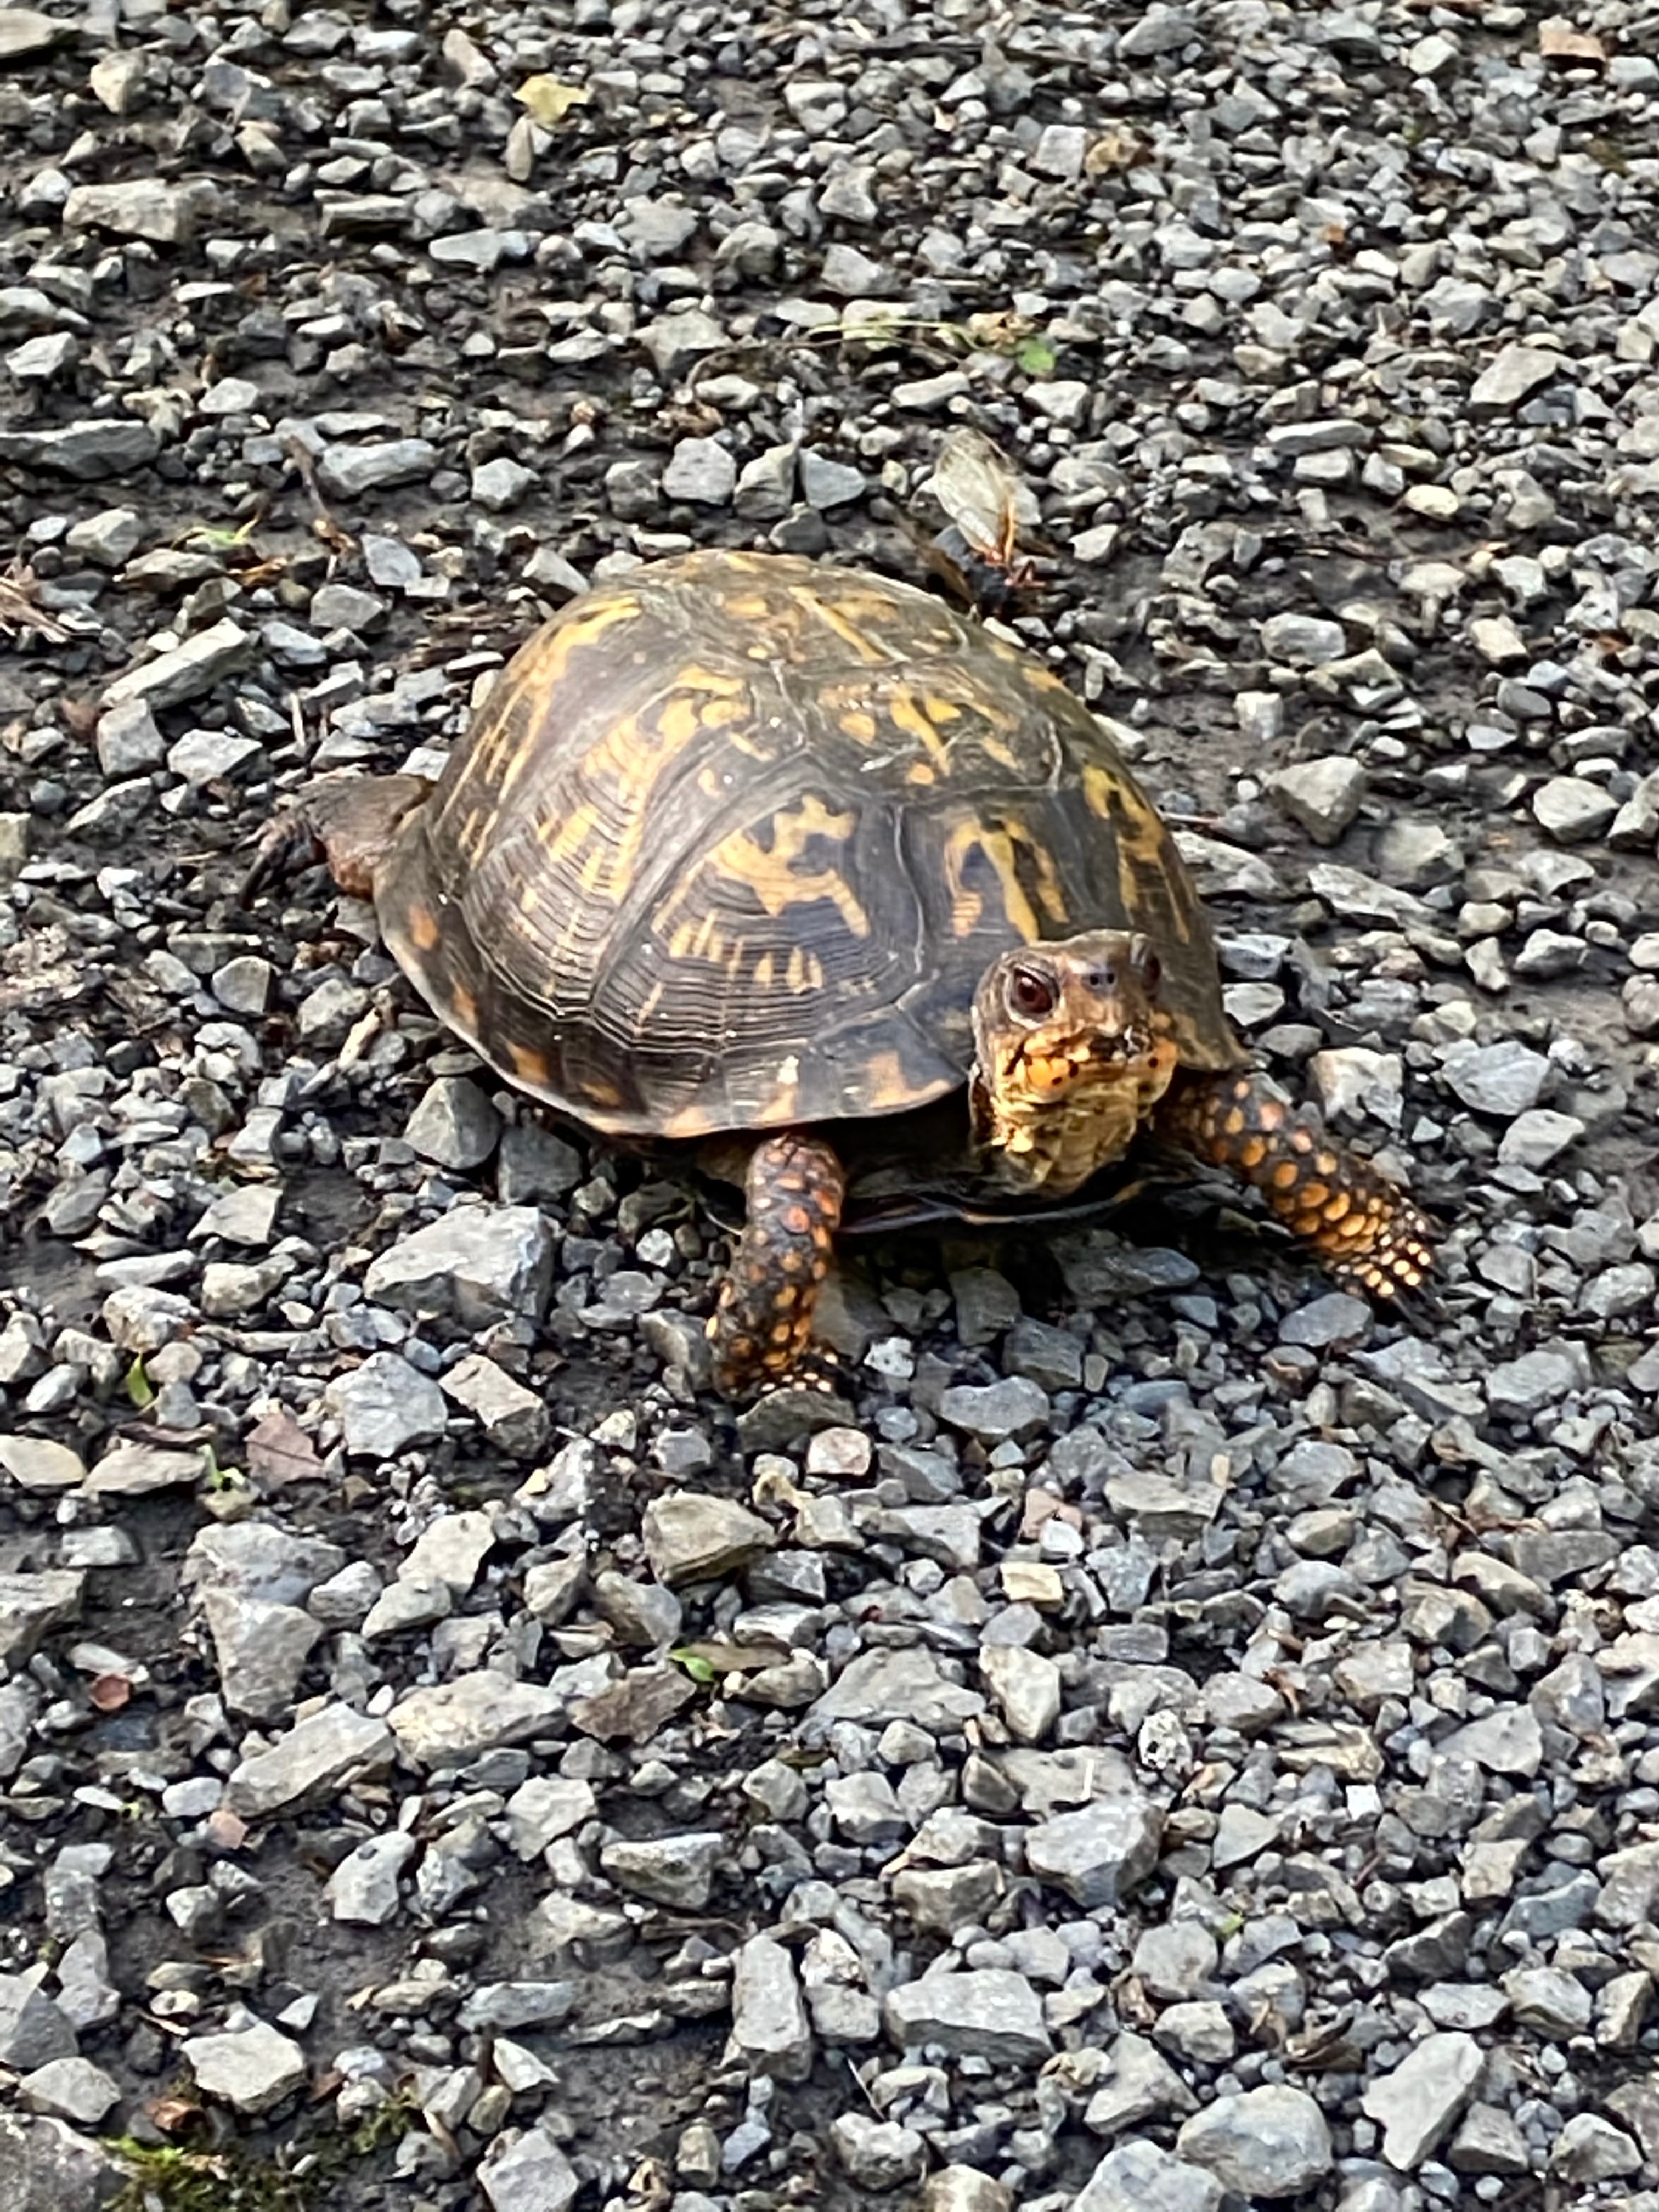 Eastern Box turtles migrated to the center of the trail to lay eggs each evening all along the trail...each morning the eggs were dug up and the contents eaten, likely by raccoons.